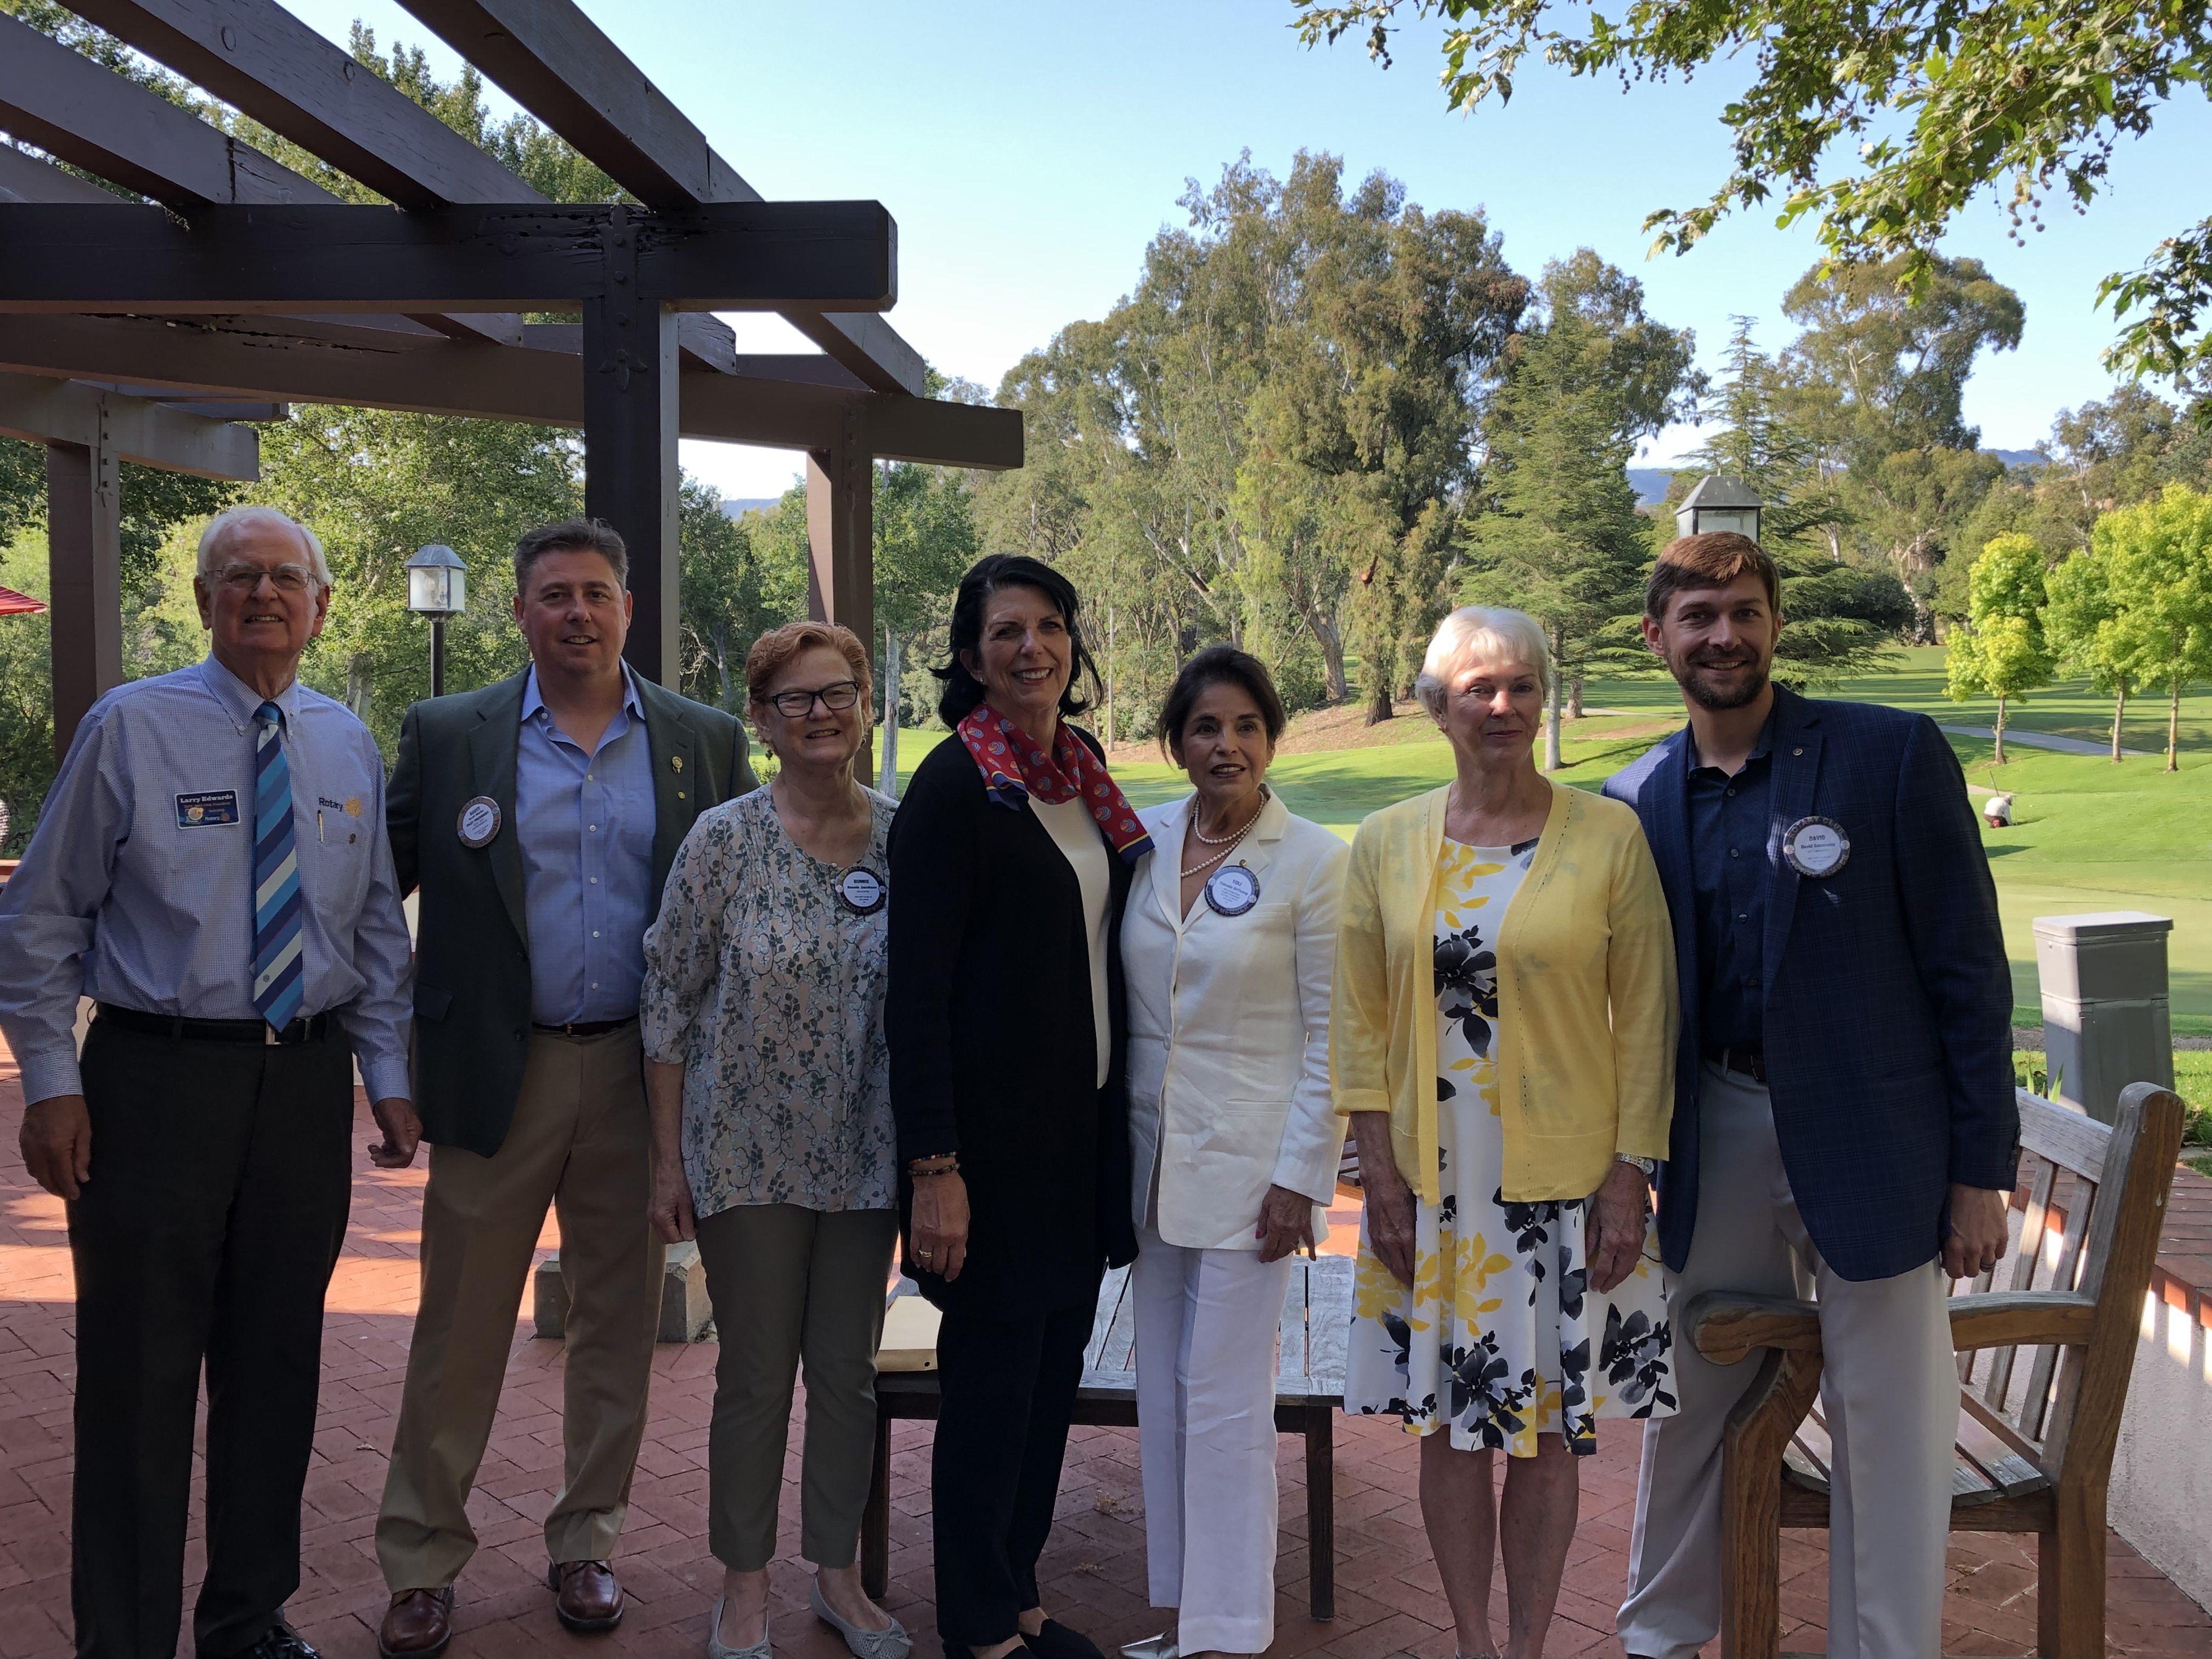 District governor helps Solvang Rotary induct 5 new members